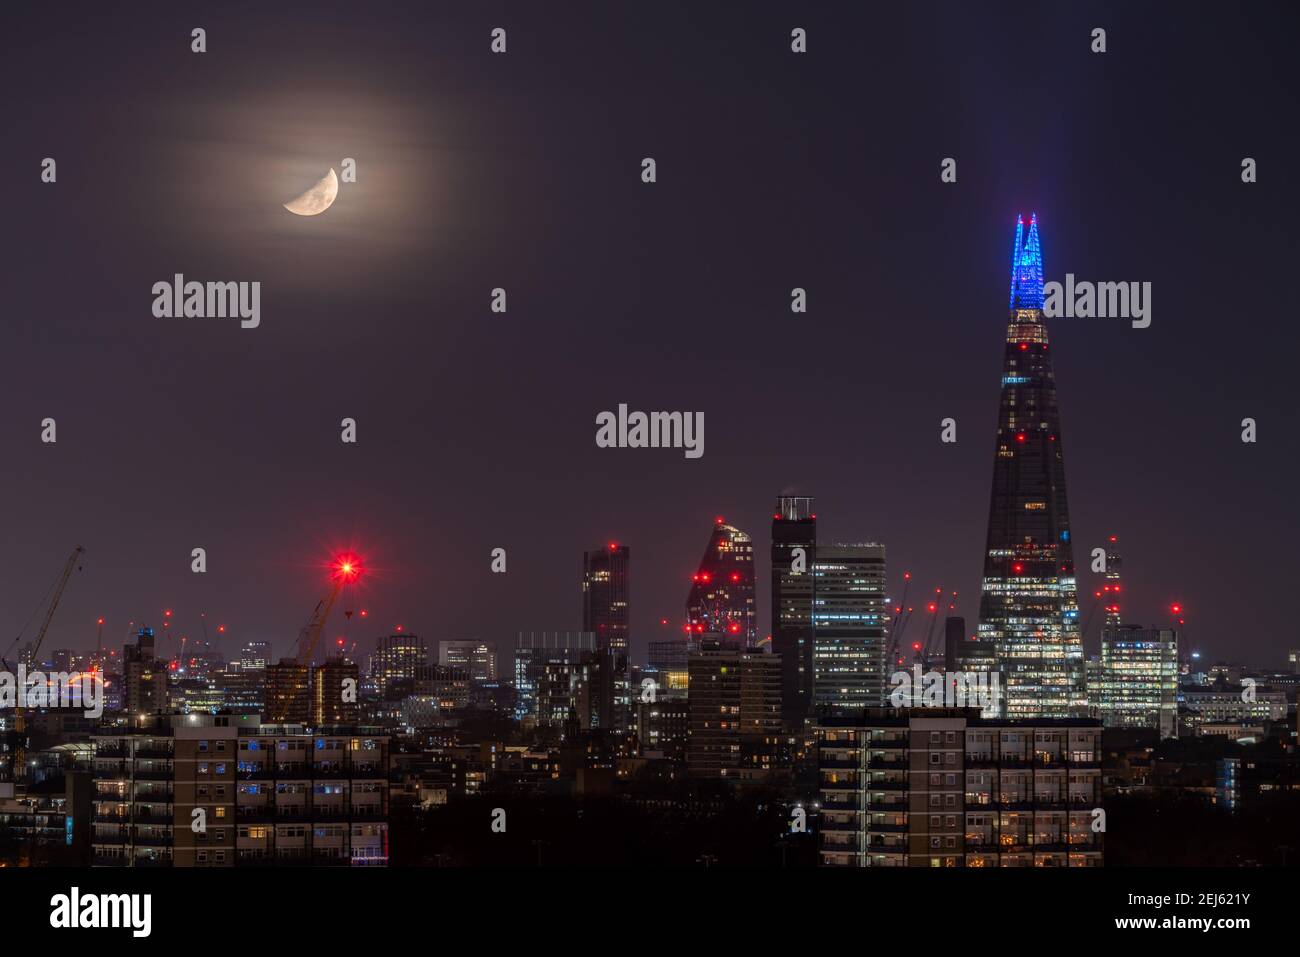 UK Weather: A first quarter moon sets just after midnight over the city following a west north westerly direction. London, UK. Stock Photo